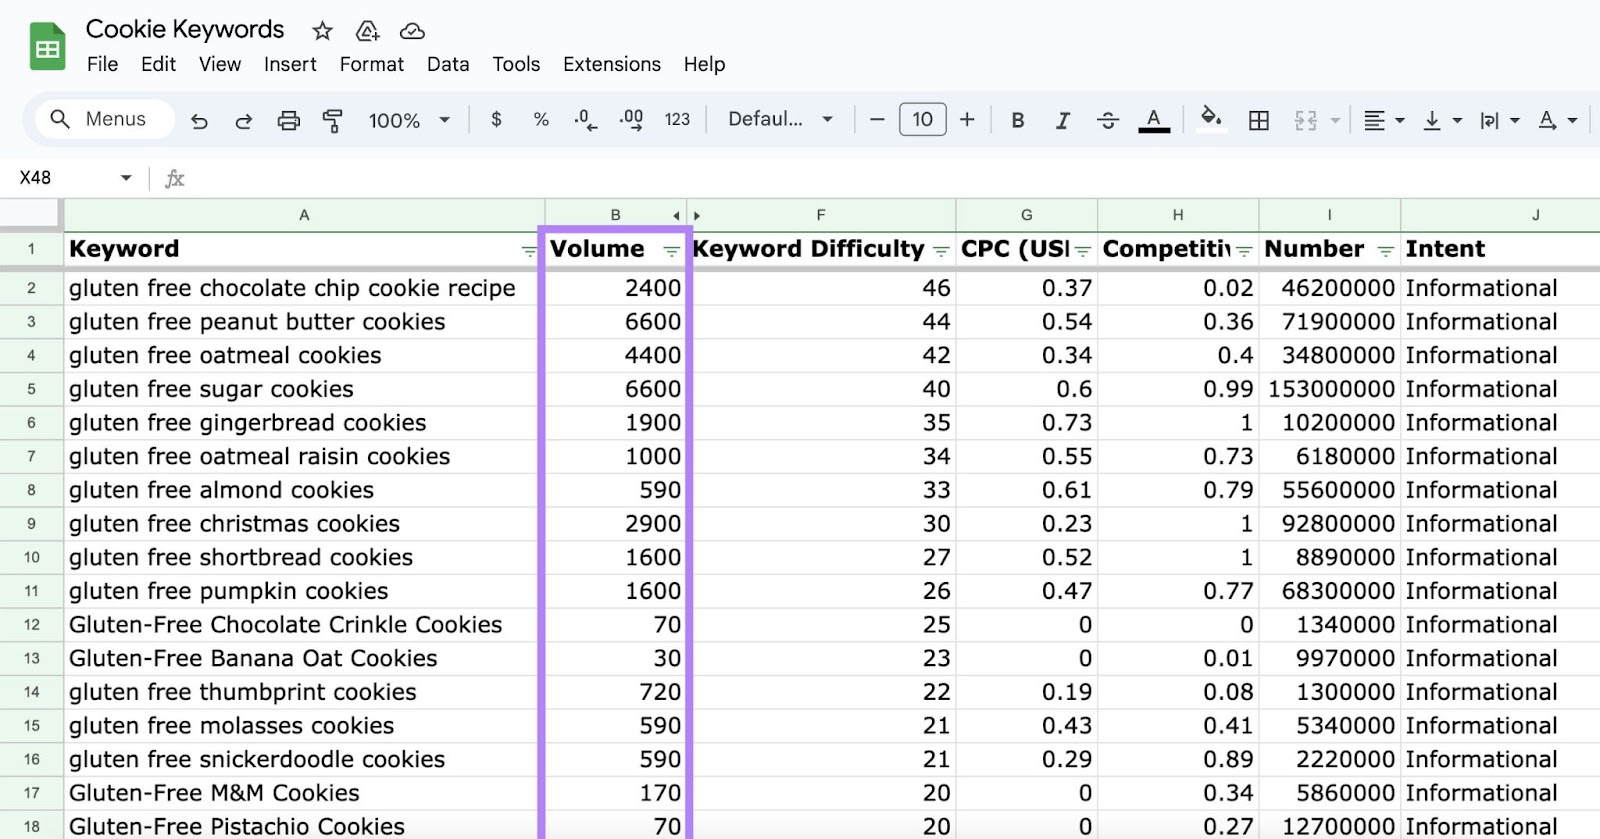 "Volume" column highlighted in the "Cookie Keywords" spreadsheet